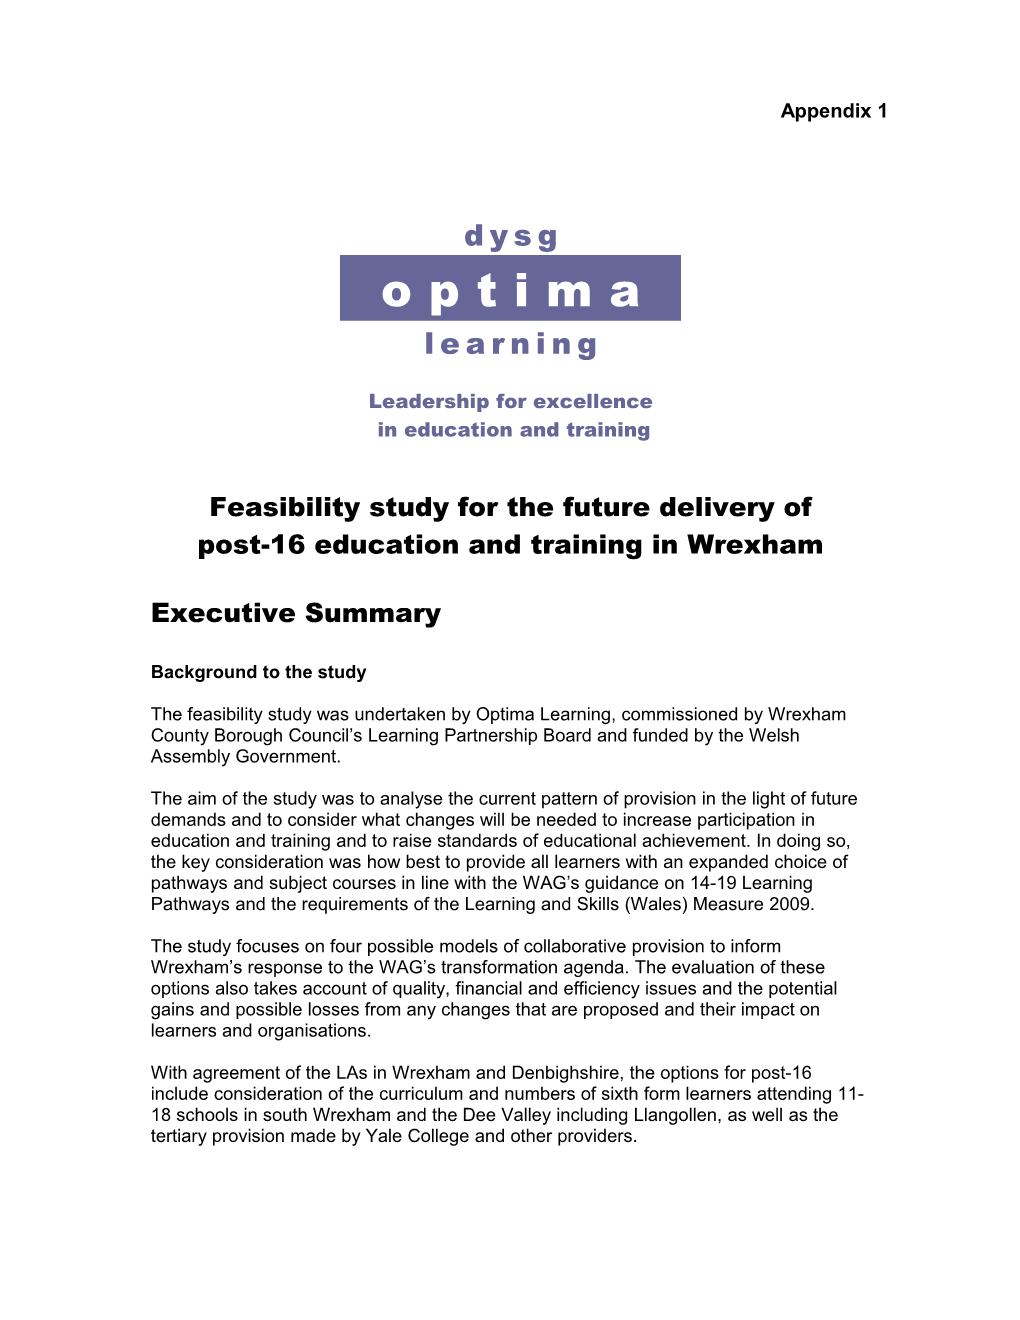 Feasibility Study for the Future Delivery Of